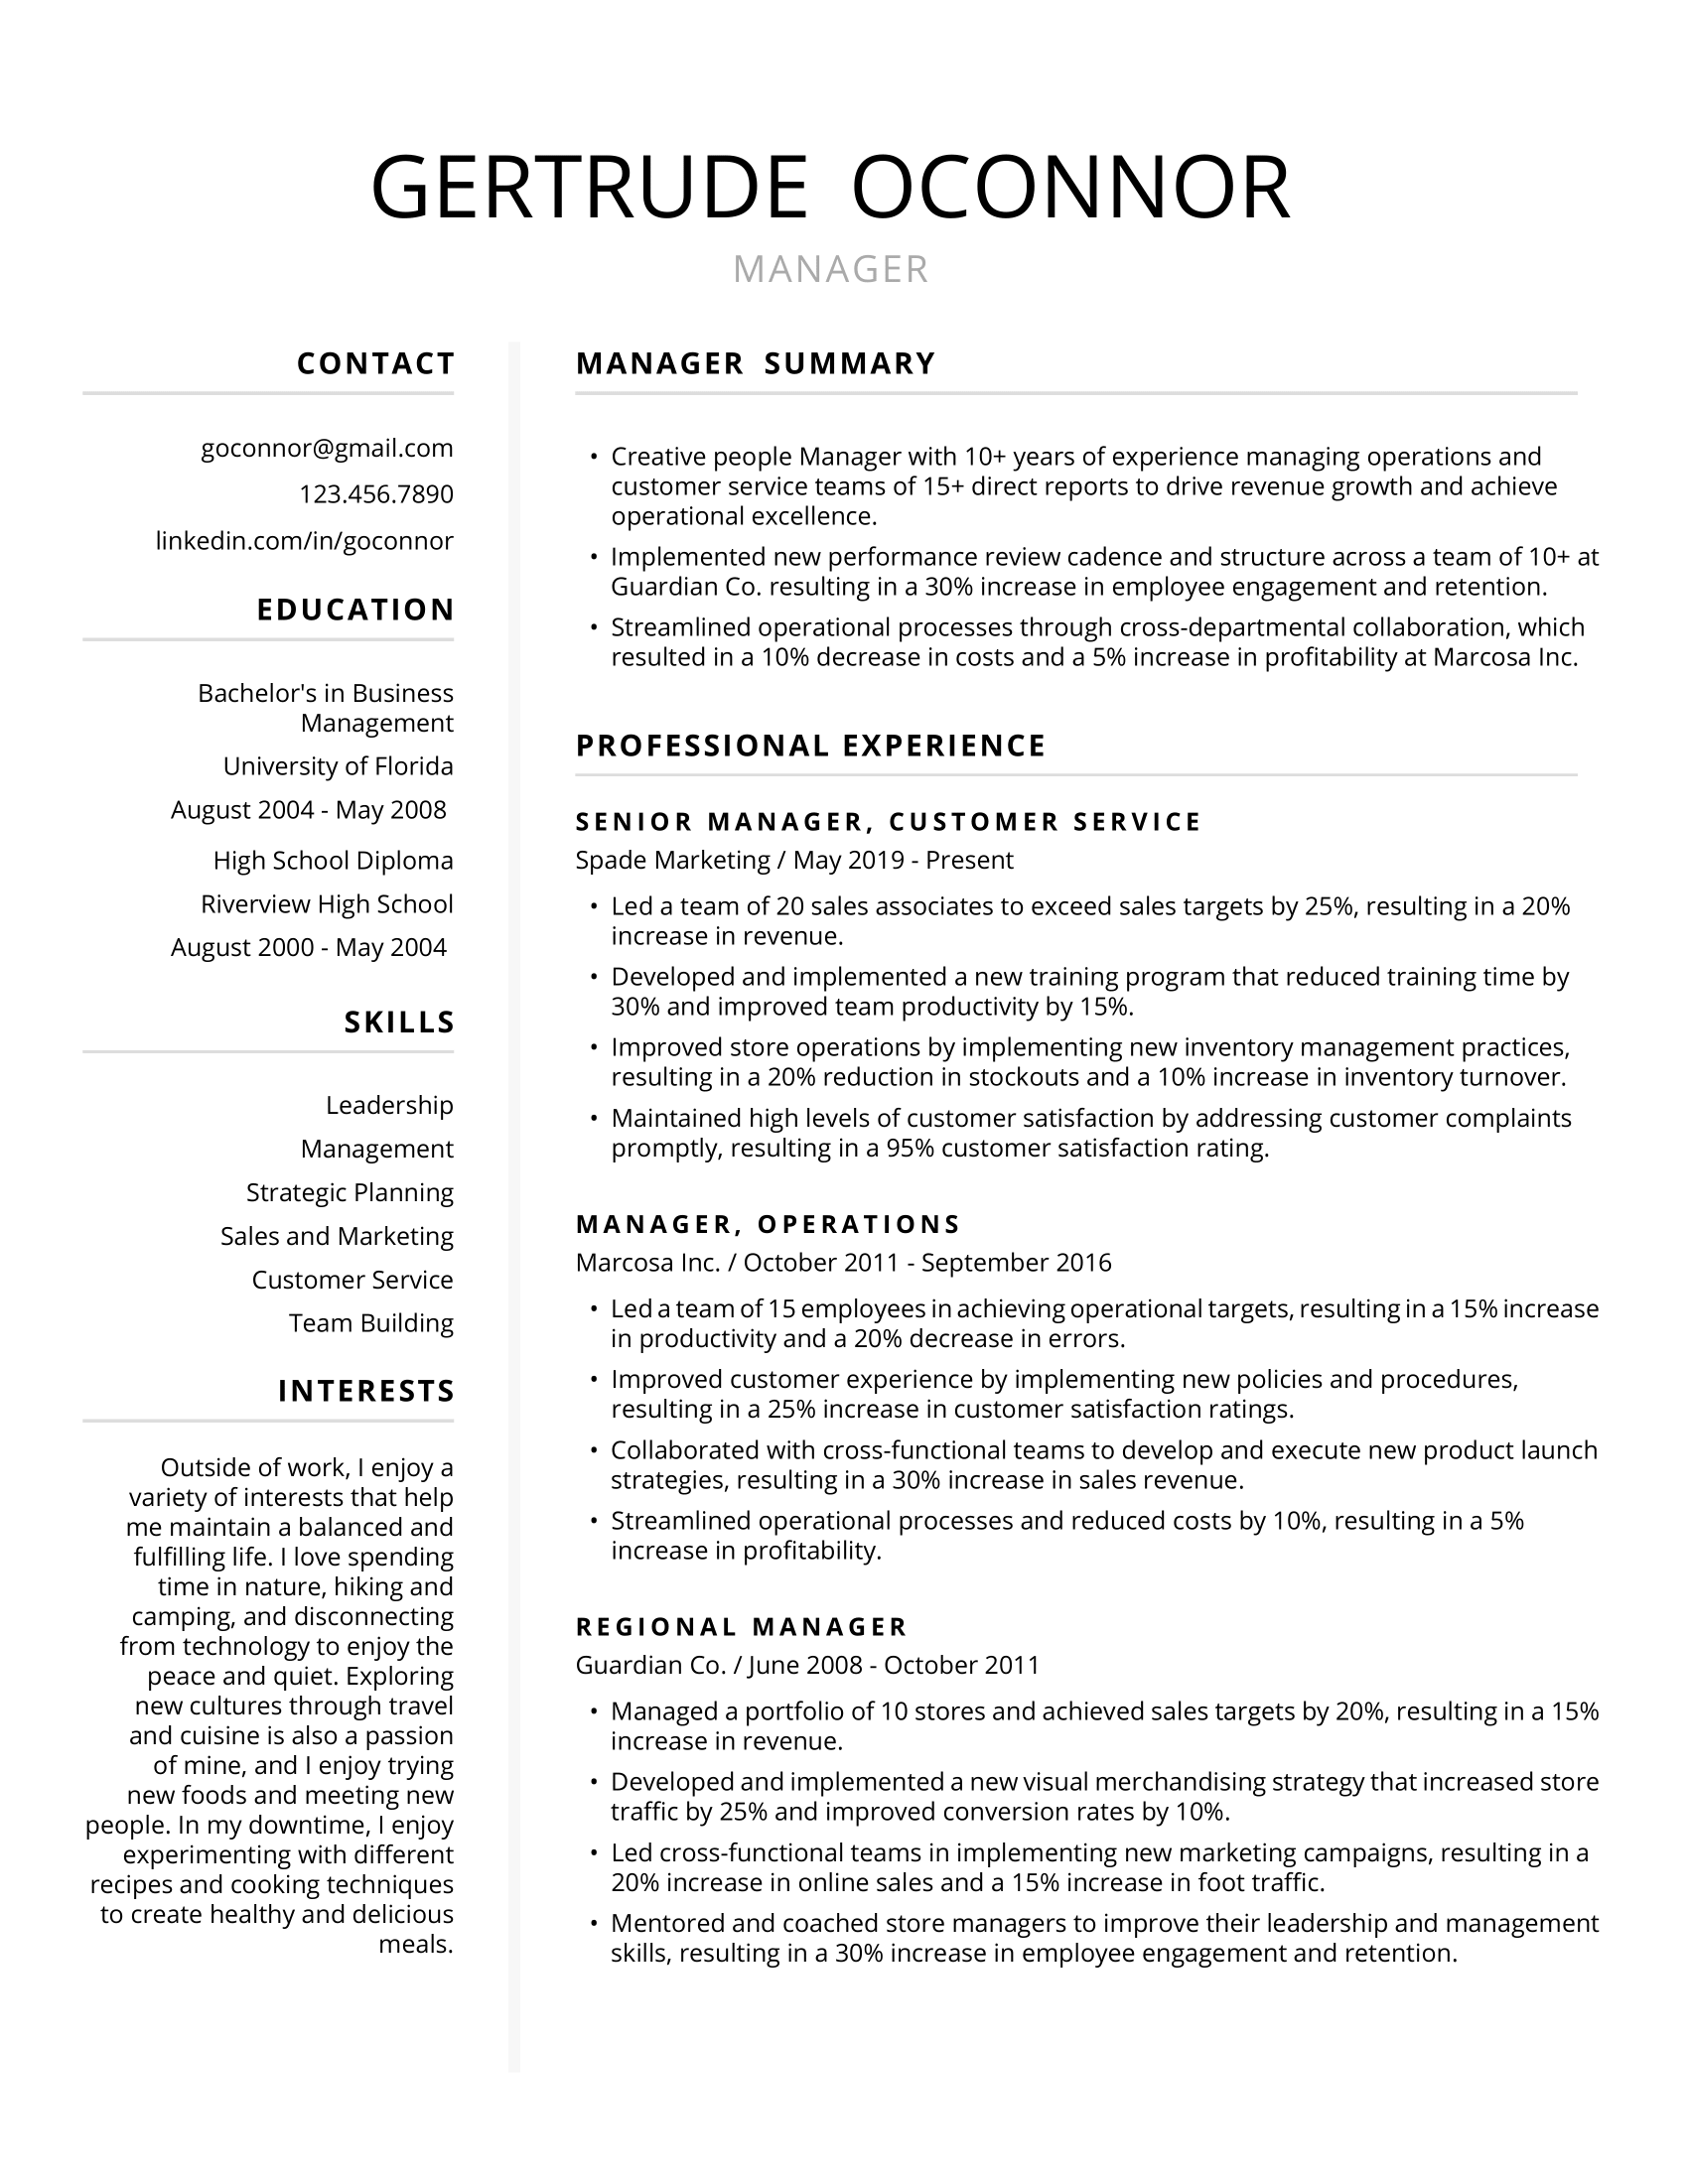 writing a management resume